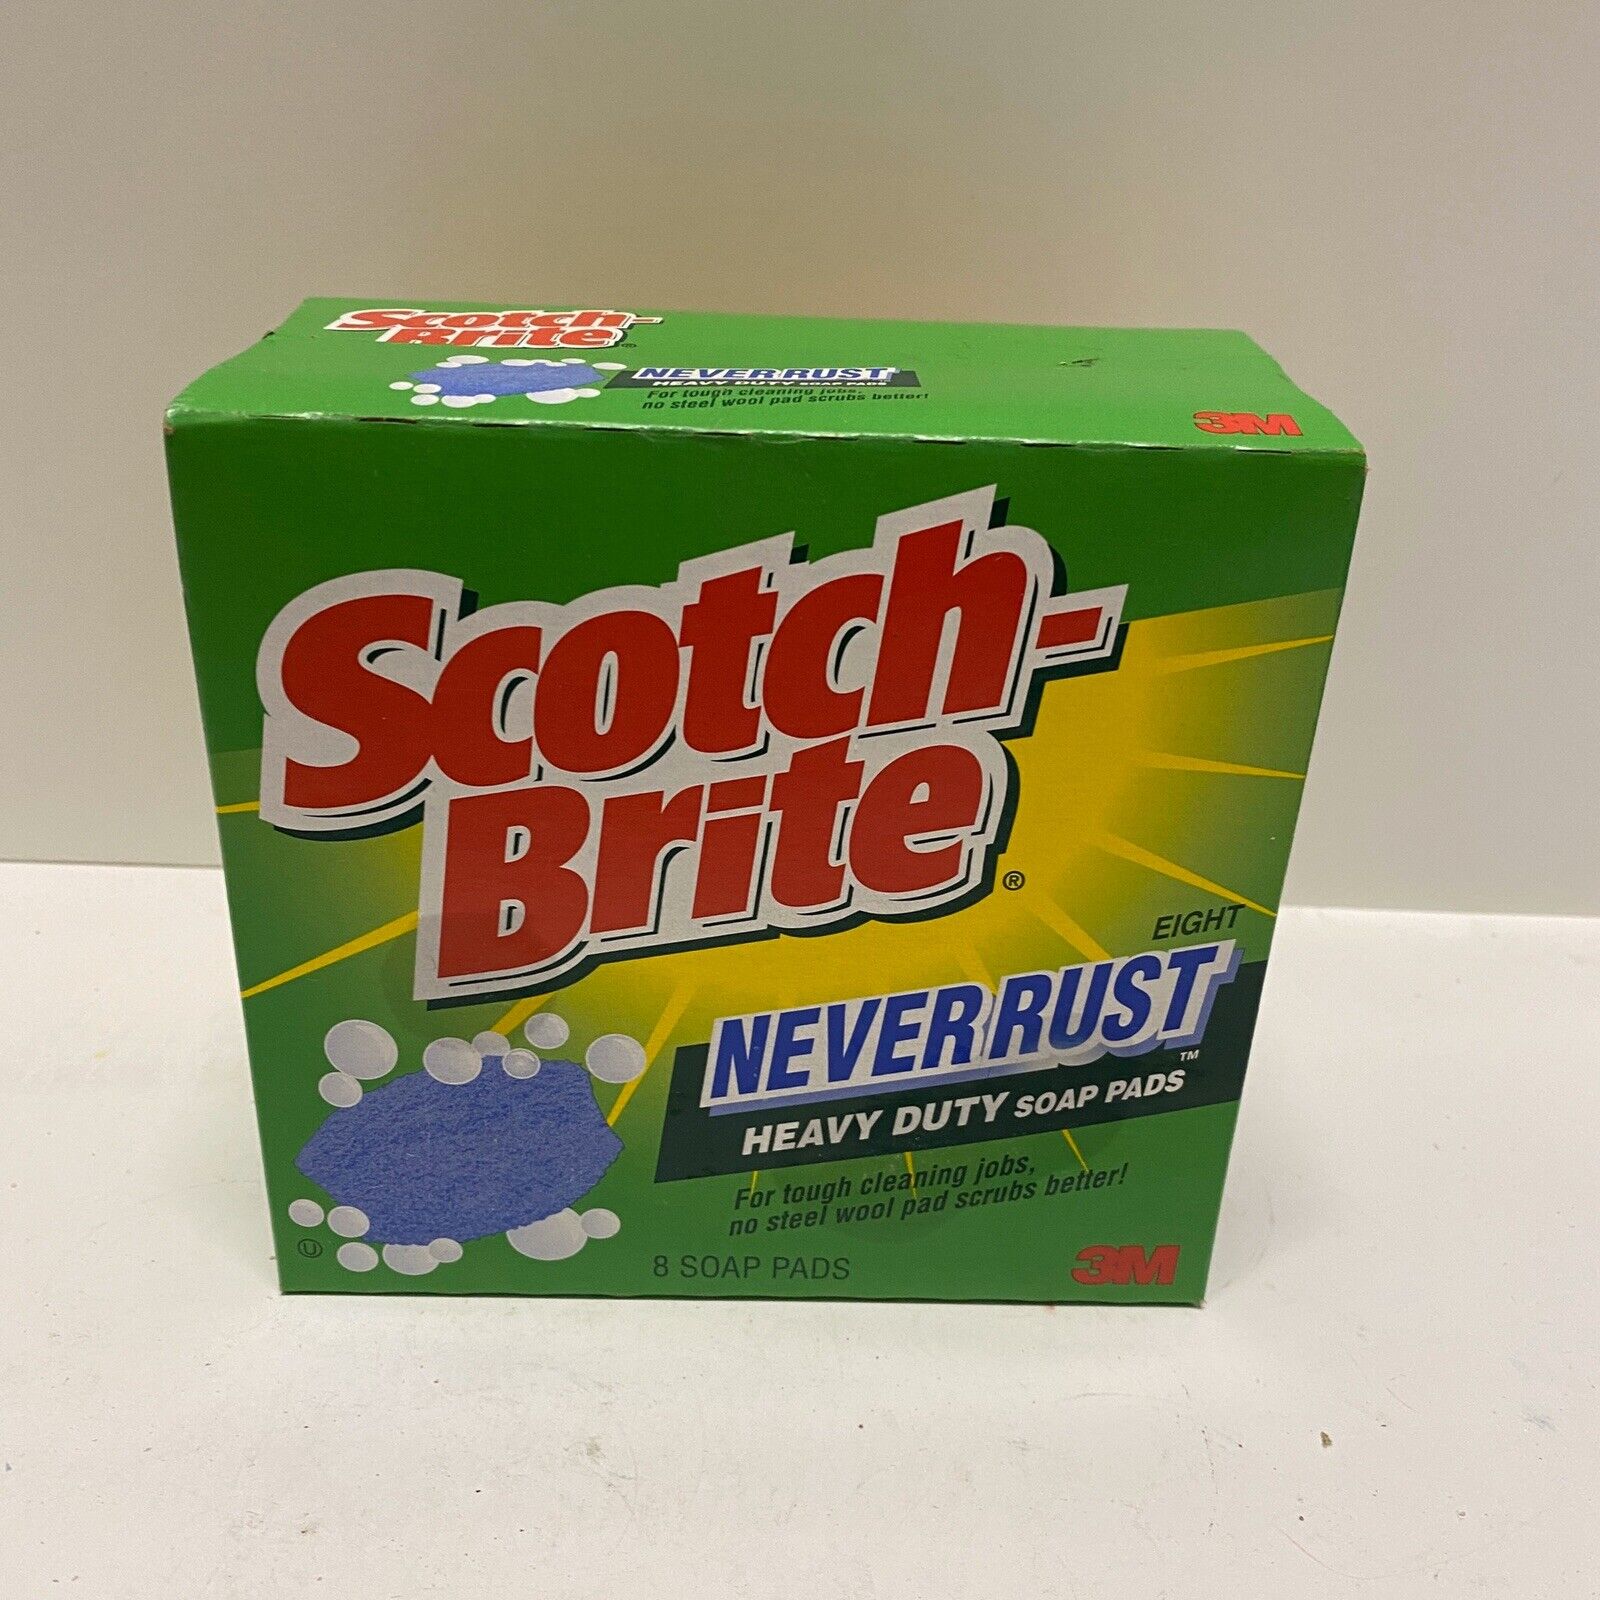 Scotch Brite Never Rust Heavy Duty Soap Pads 8 Count New Rare and Discontinued